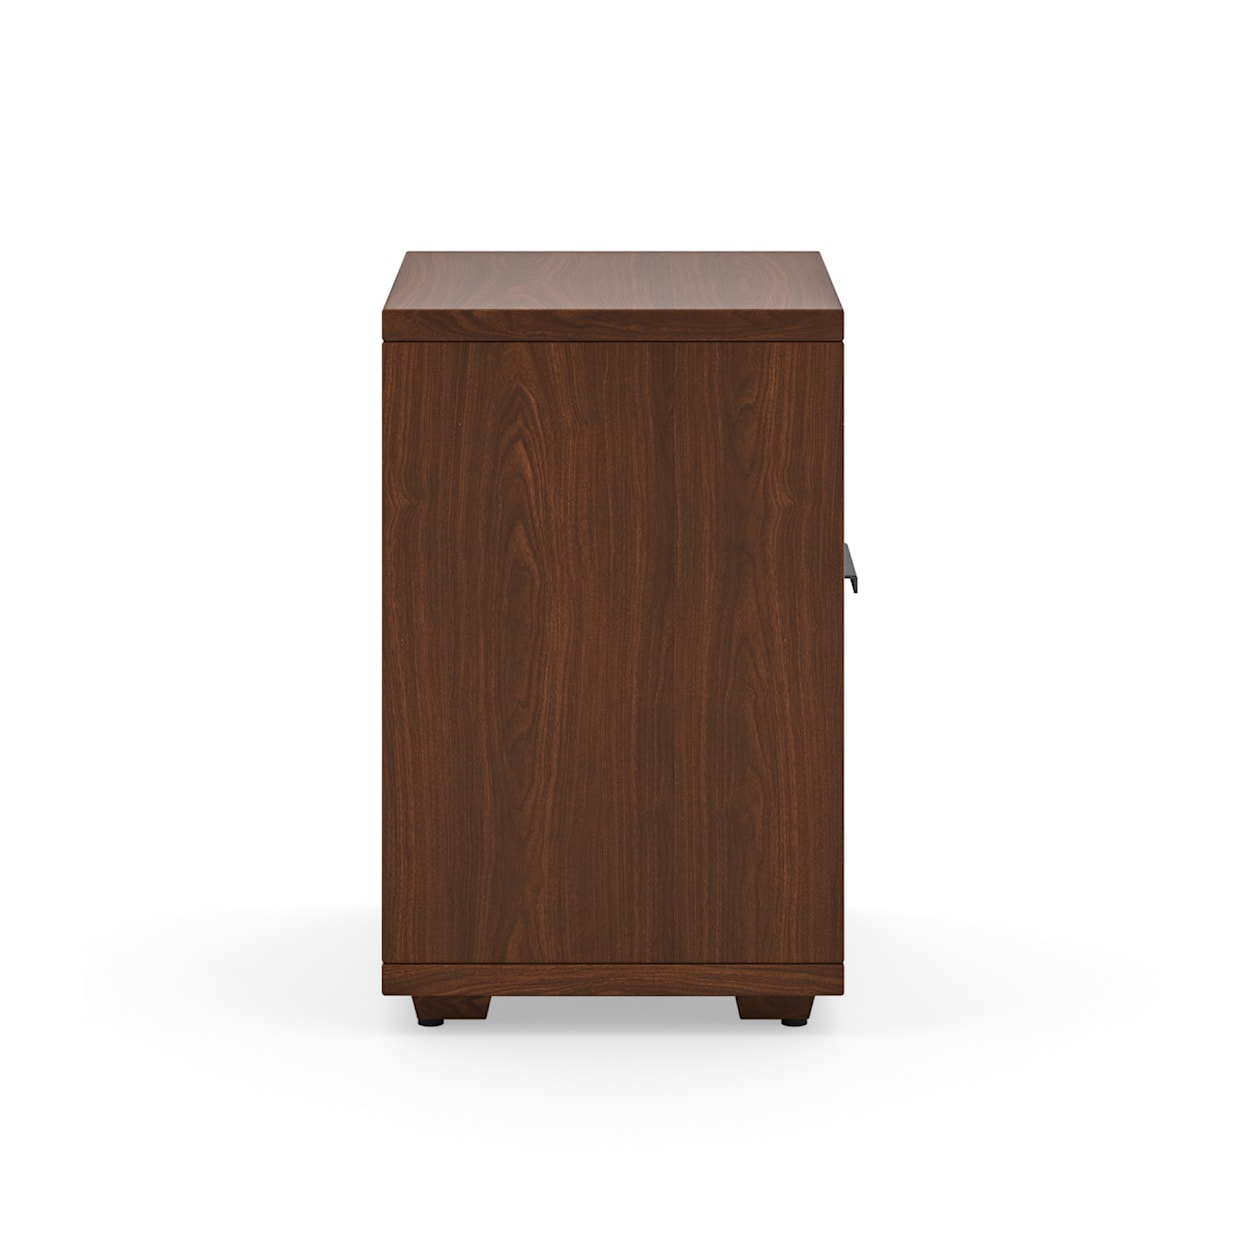 homestyles Merge File Cabinet